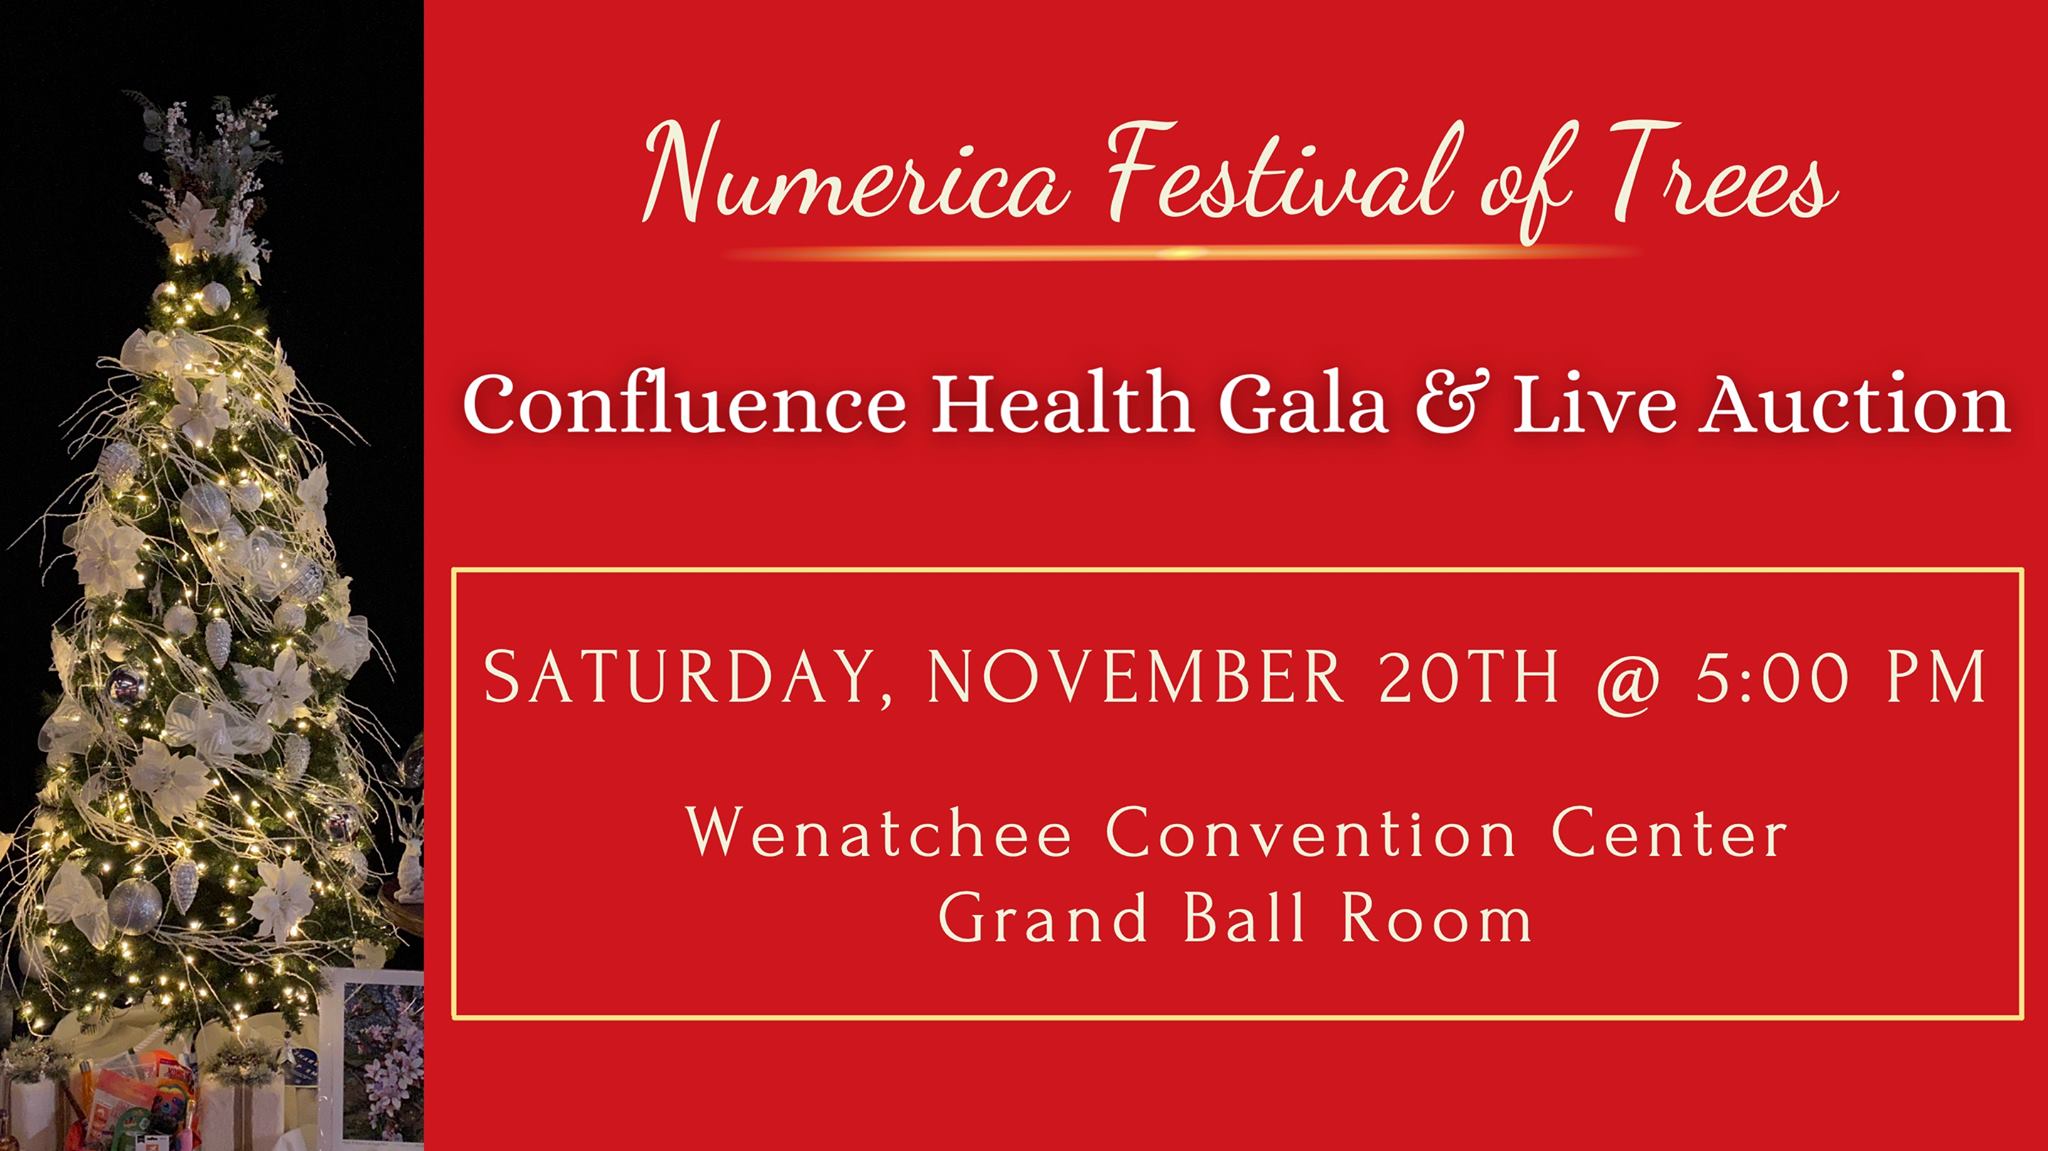 <h1 class="tribe-events-single-event-title">Numerica Festival of Trees Confluence Health Gala & Live Auction</h1>